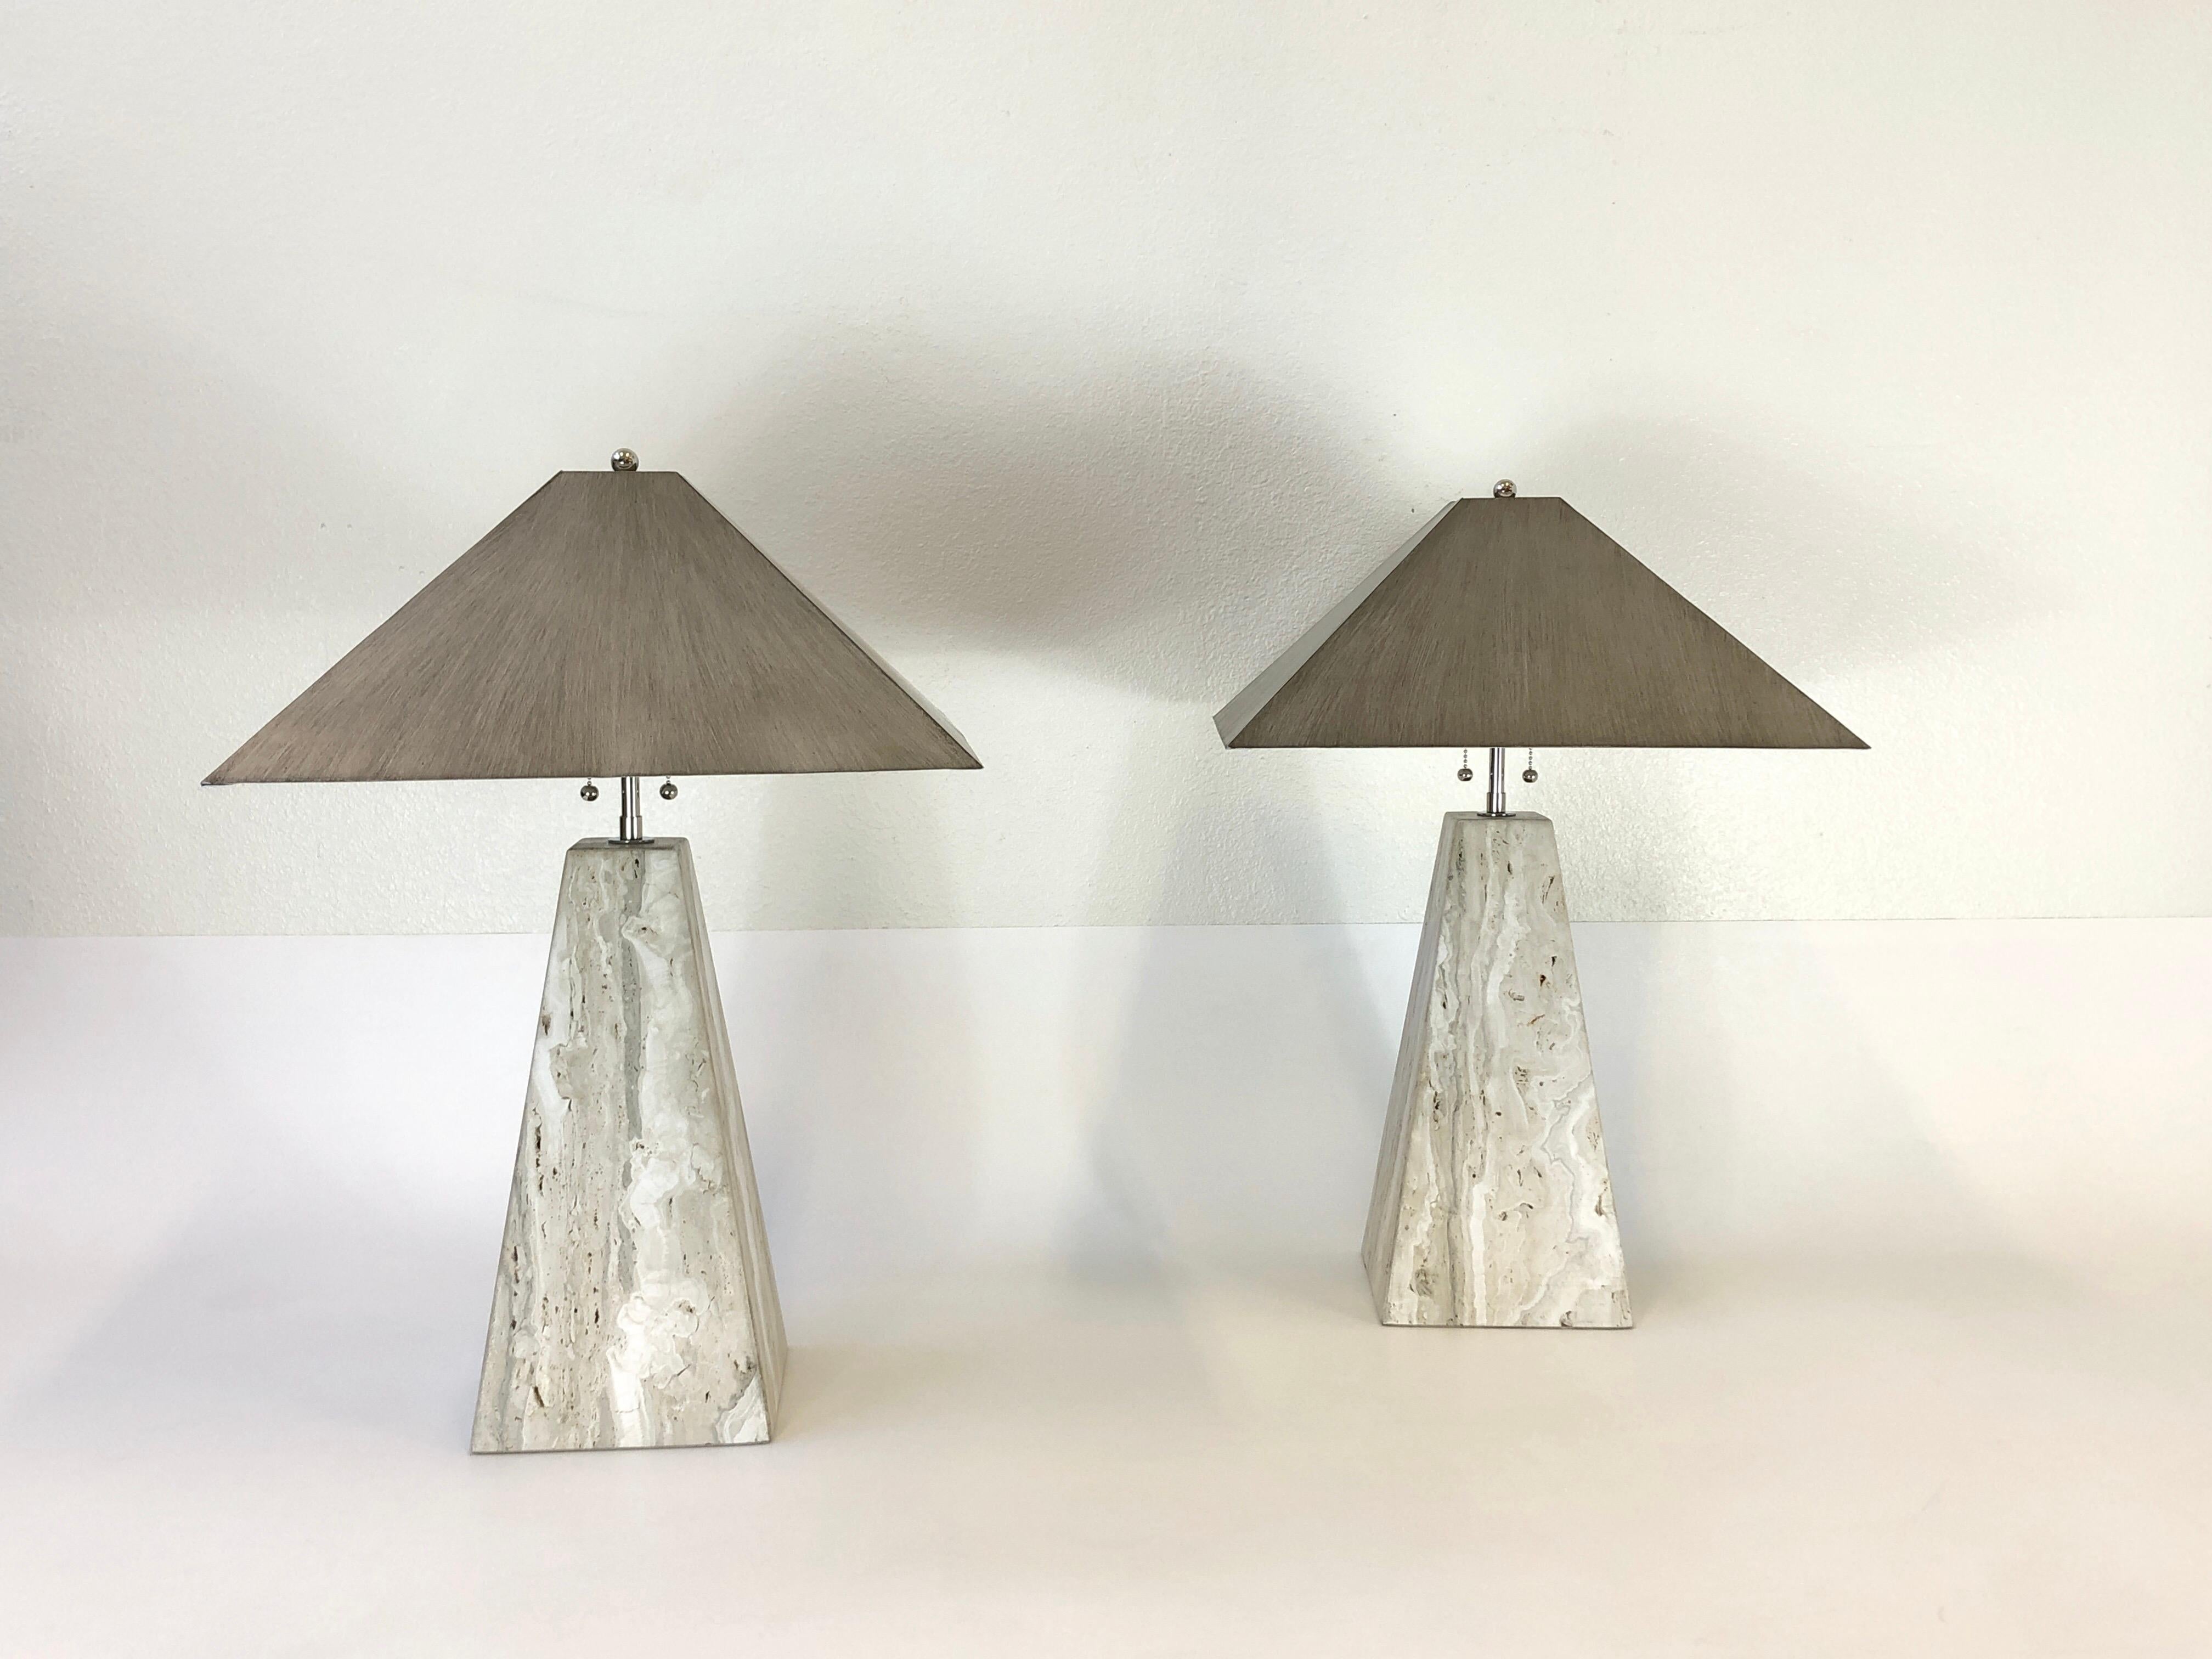 A spectacular pair of 1970s Italian travertine obelisk shape table lamps. Newly rewired with new polish nickel hardware. The shades are metal with a lacquered finish (see detail photos). Both lamps are marked H.R.
Dim: 27” high 18”wide 18”